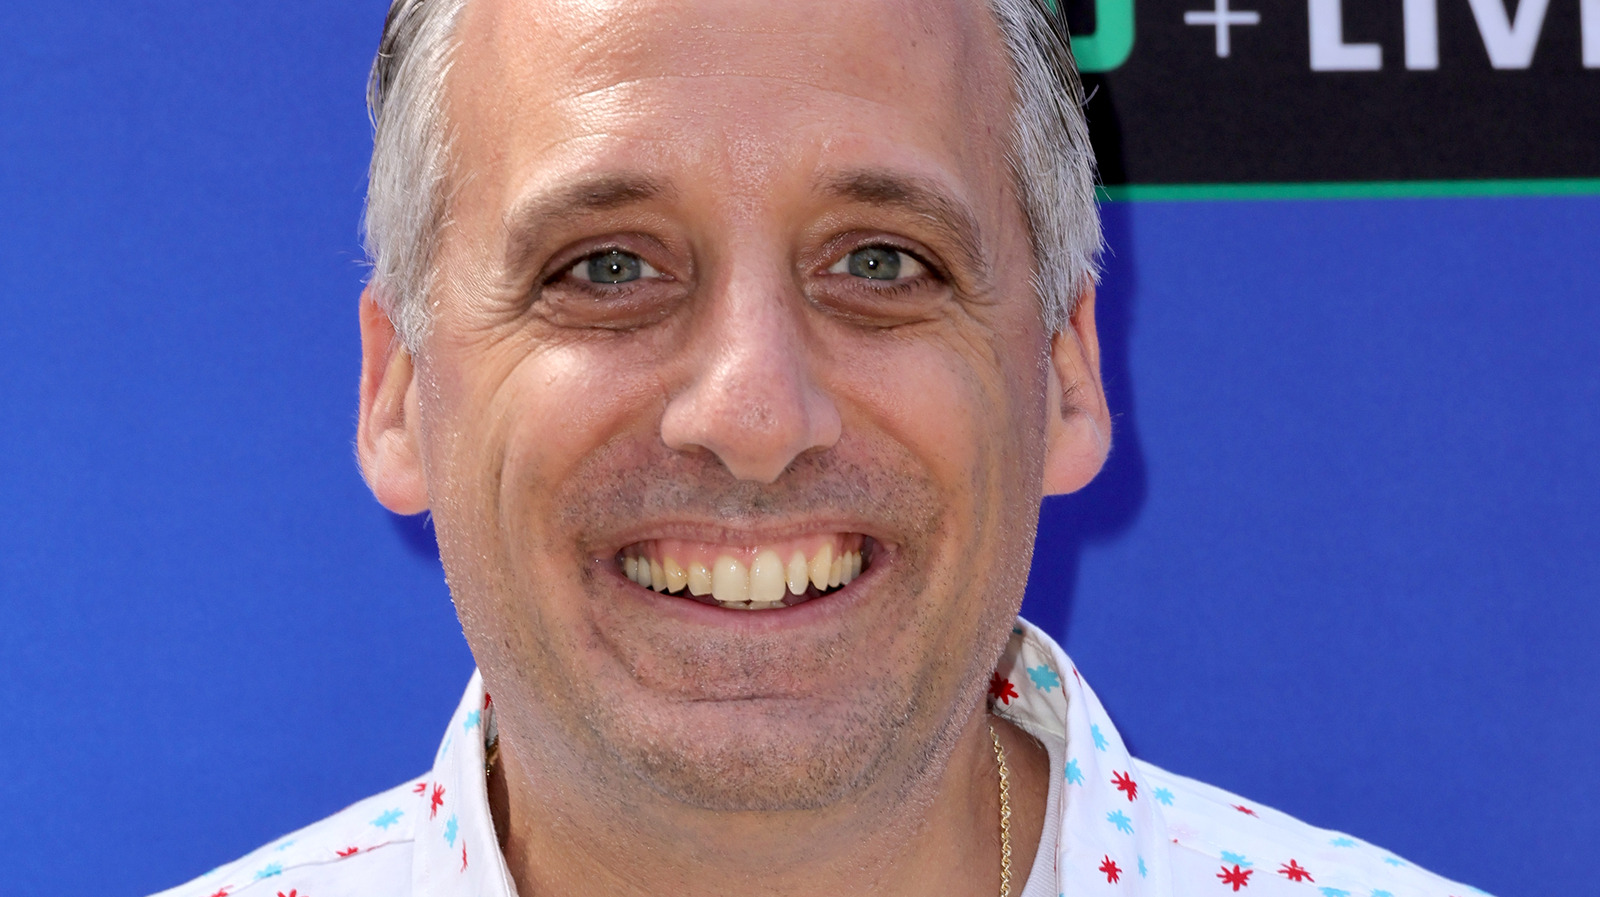 Impractical Jokers Joe Gatto's Possible Replacements Ranked From Worst